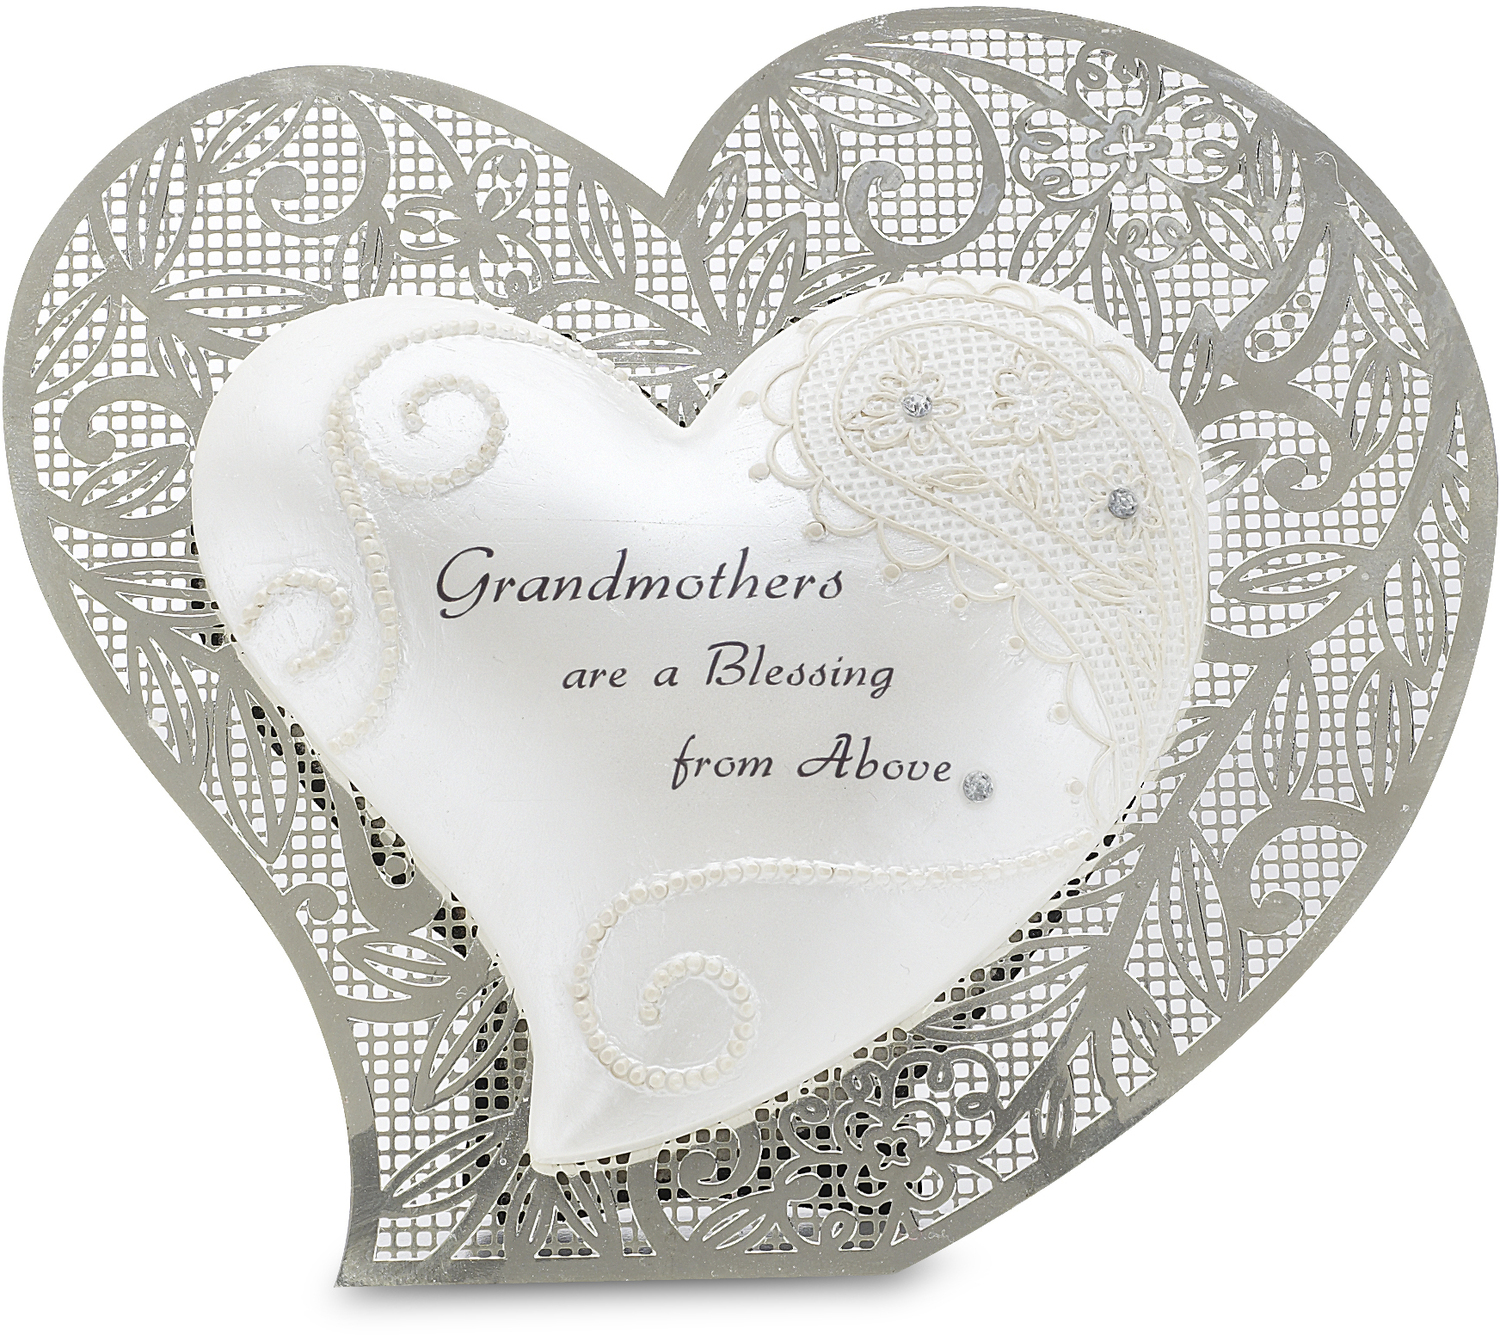 Grandmother by Little Things Mean A Lot - Grandmother - 4.5" Self-Standing Heart